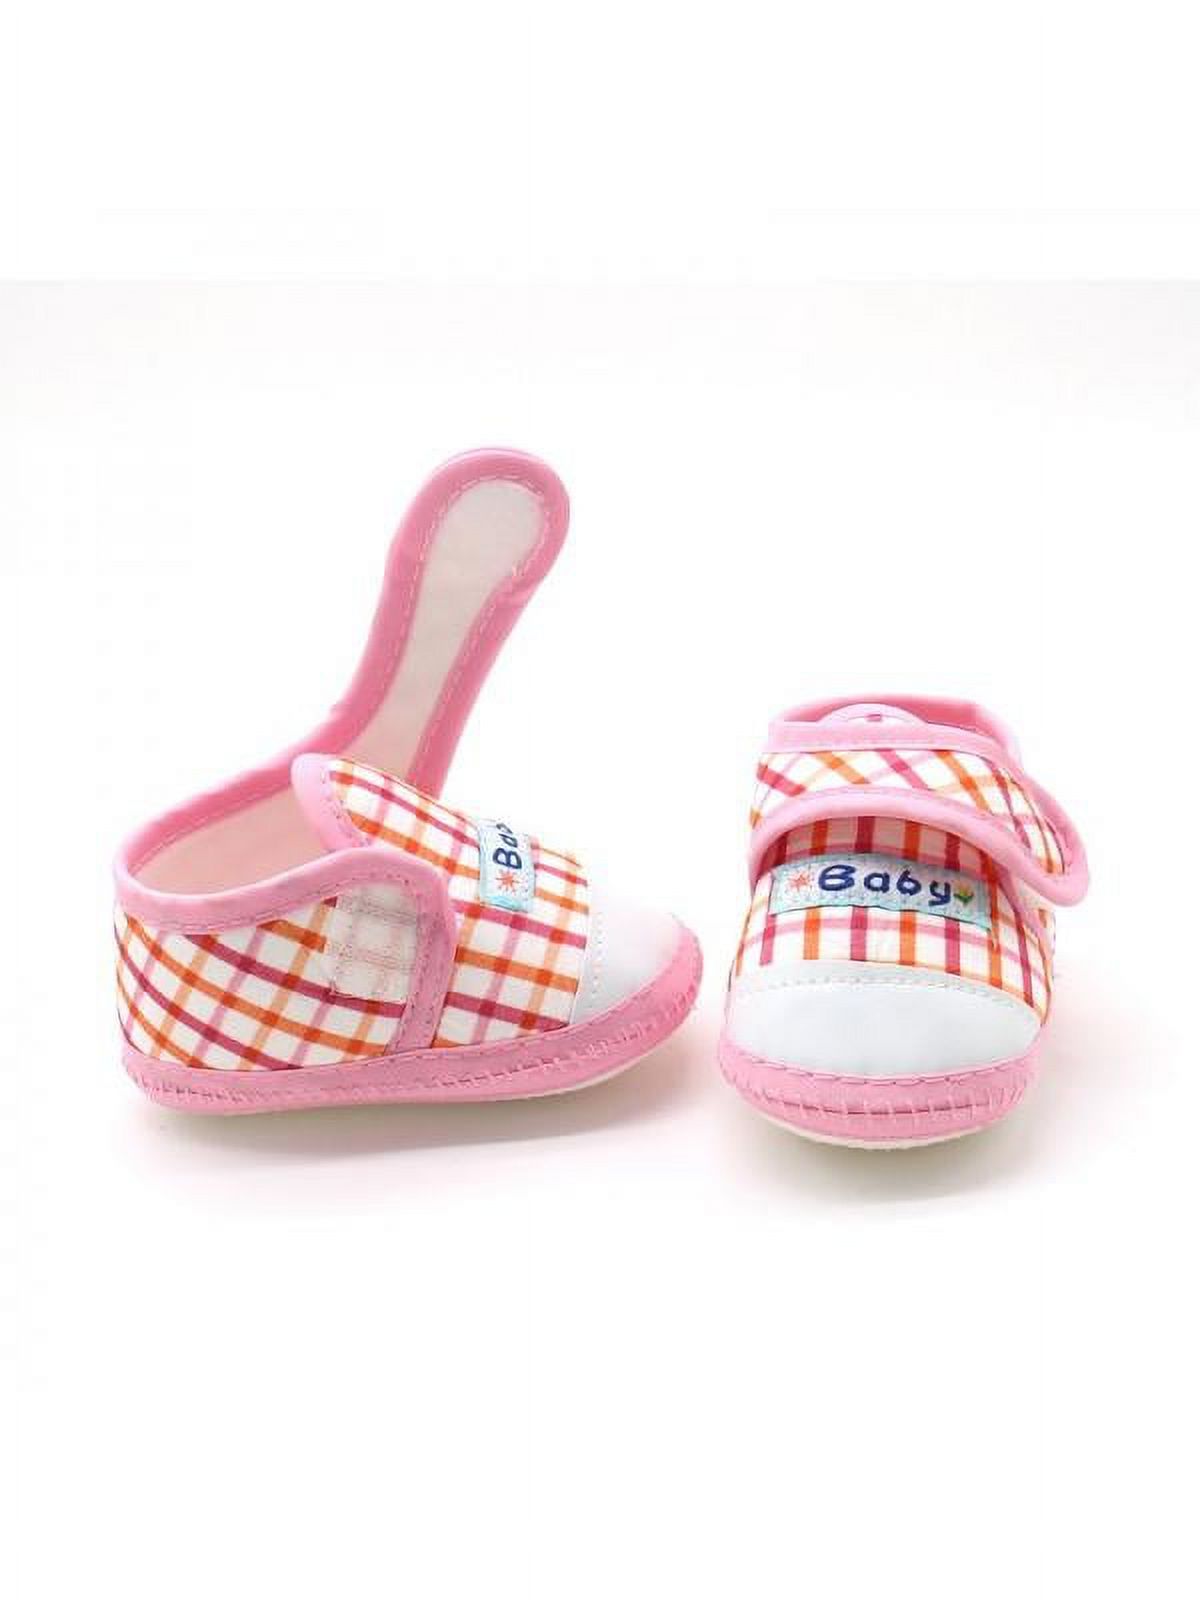 Baby Toddler Girl Boy Shoes Sneakers Soft Sole First Walker - image 5 of 8